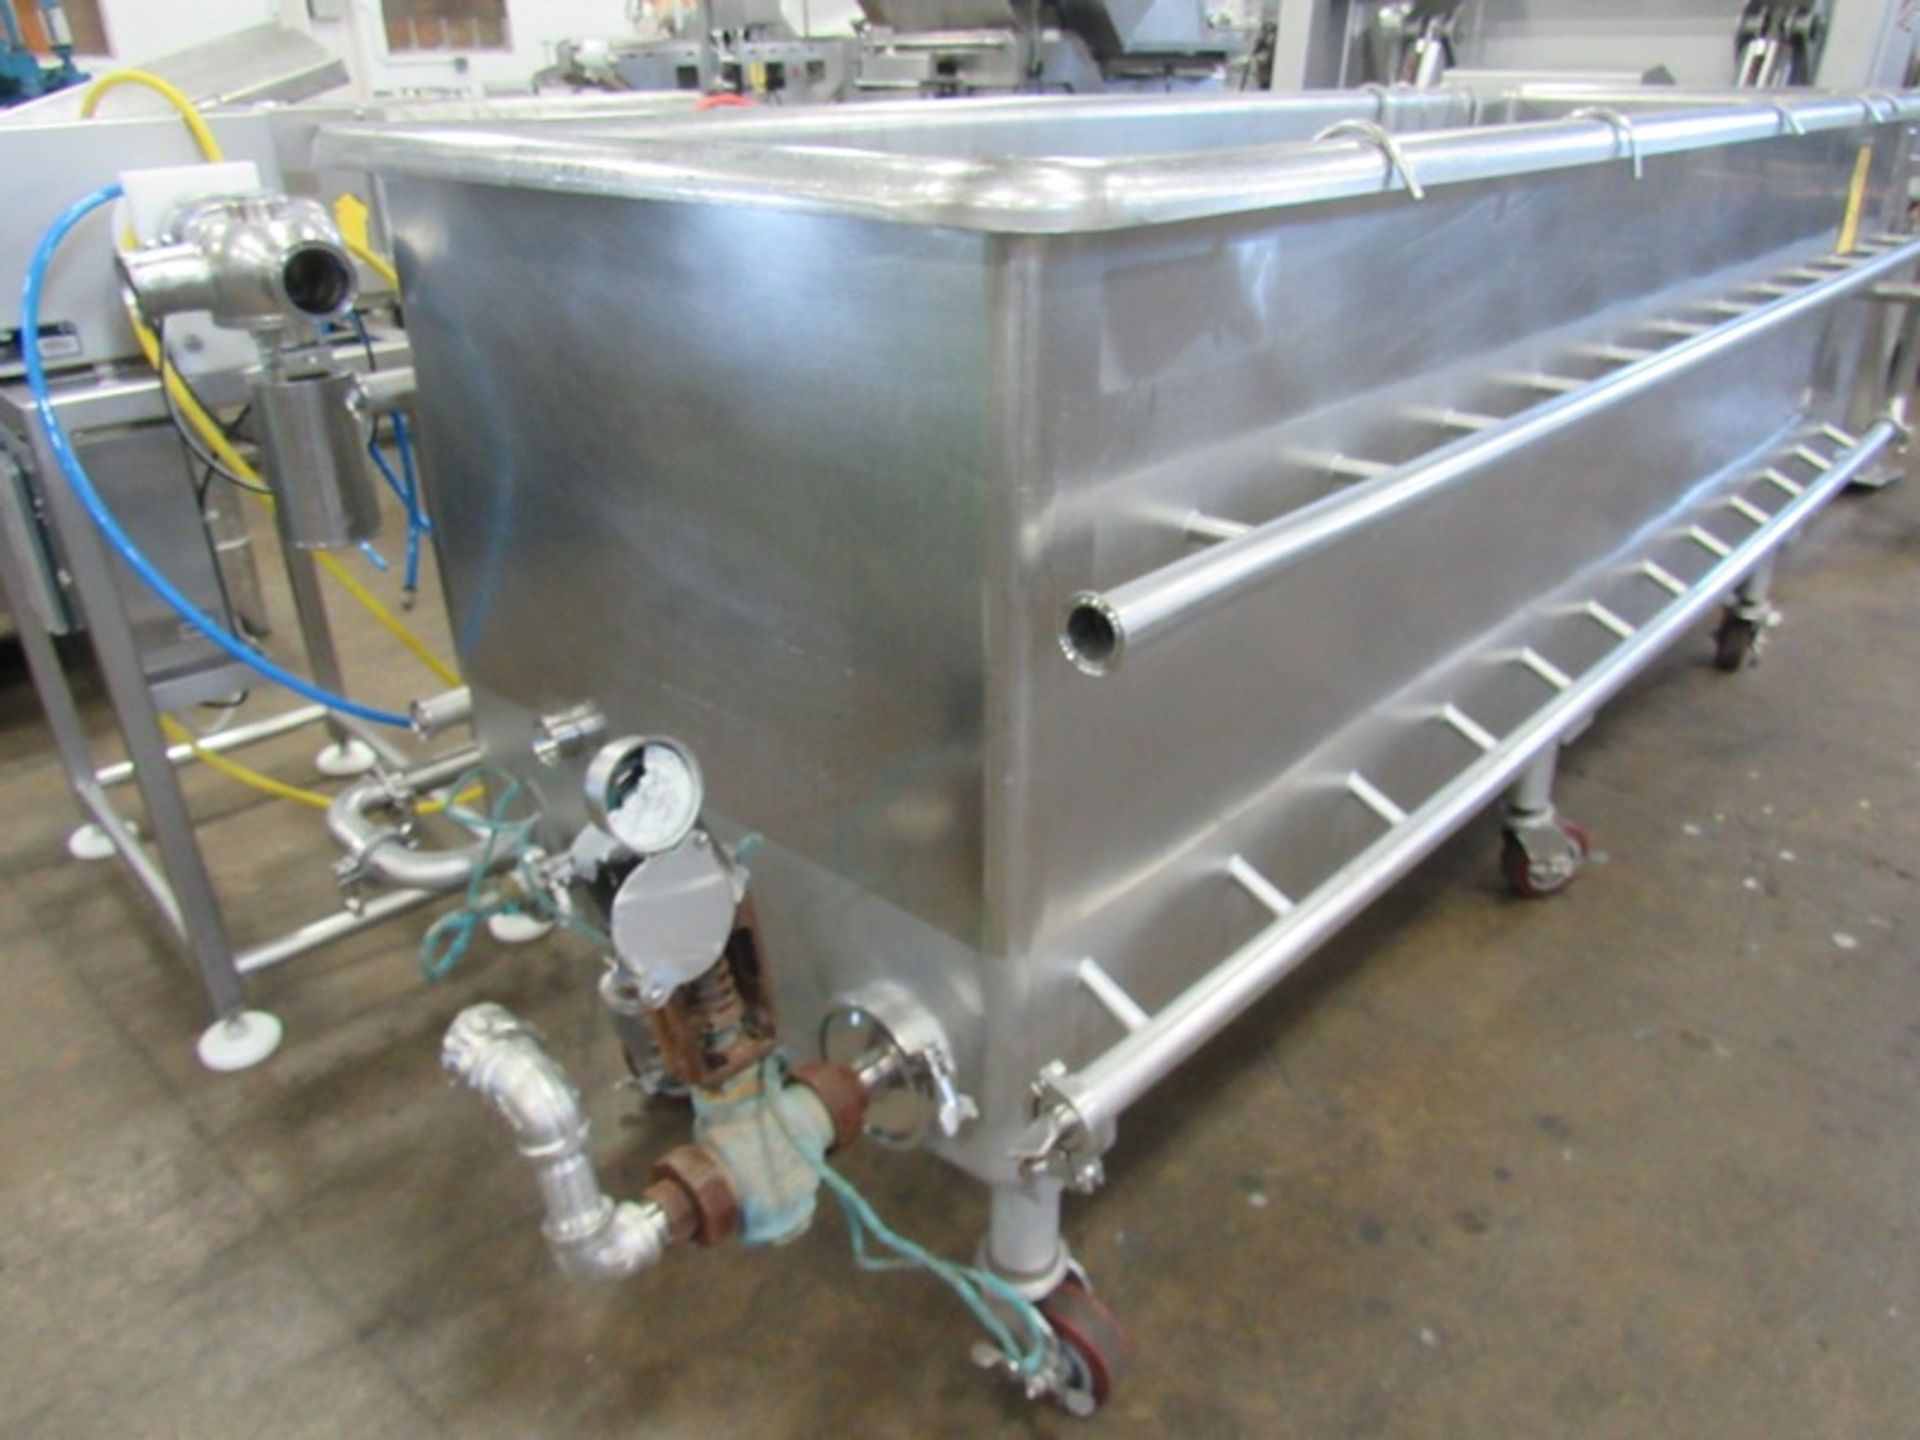 Sani-Matic Mdl. BWJ375 Stainless Steel COP Tank, 30" X 102" L X 30" D tank, 1" piping to jets, (3) - Image 2 of 8